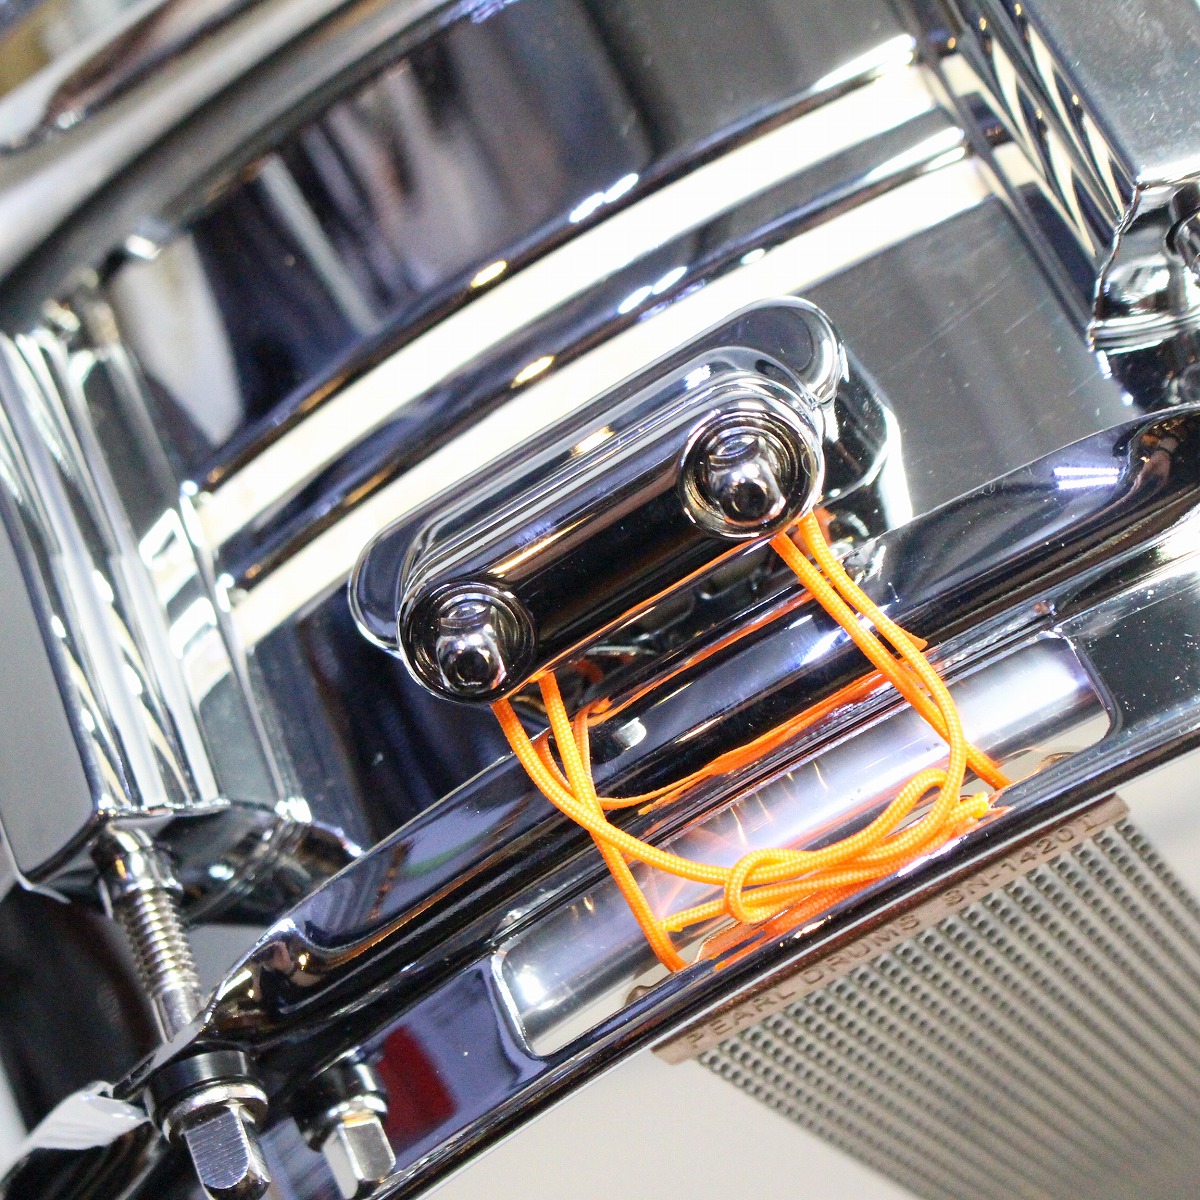 ( used )PEARL / Duoluxe DUX1450BR 14x5 Chrome Over Brass Snare Drum( Ikebukuro shop )